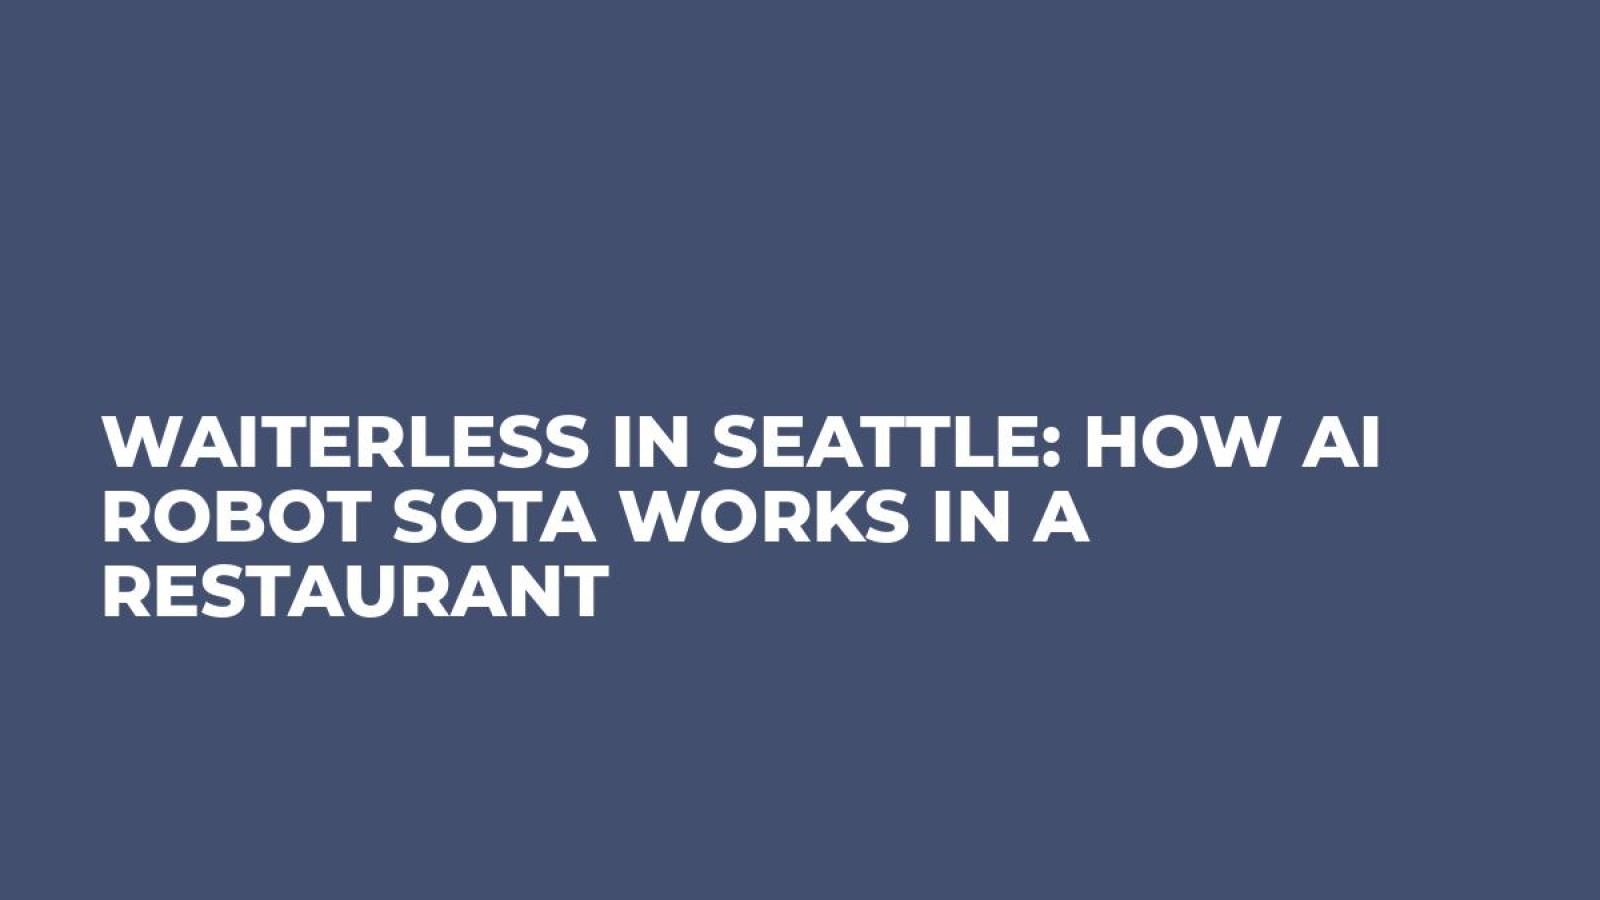 Waiterless in Seattle: How AI Robot SOTA Works in a Restaurant